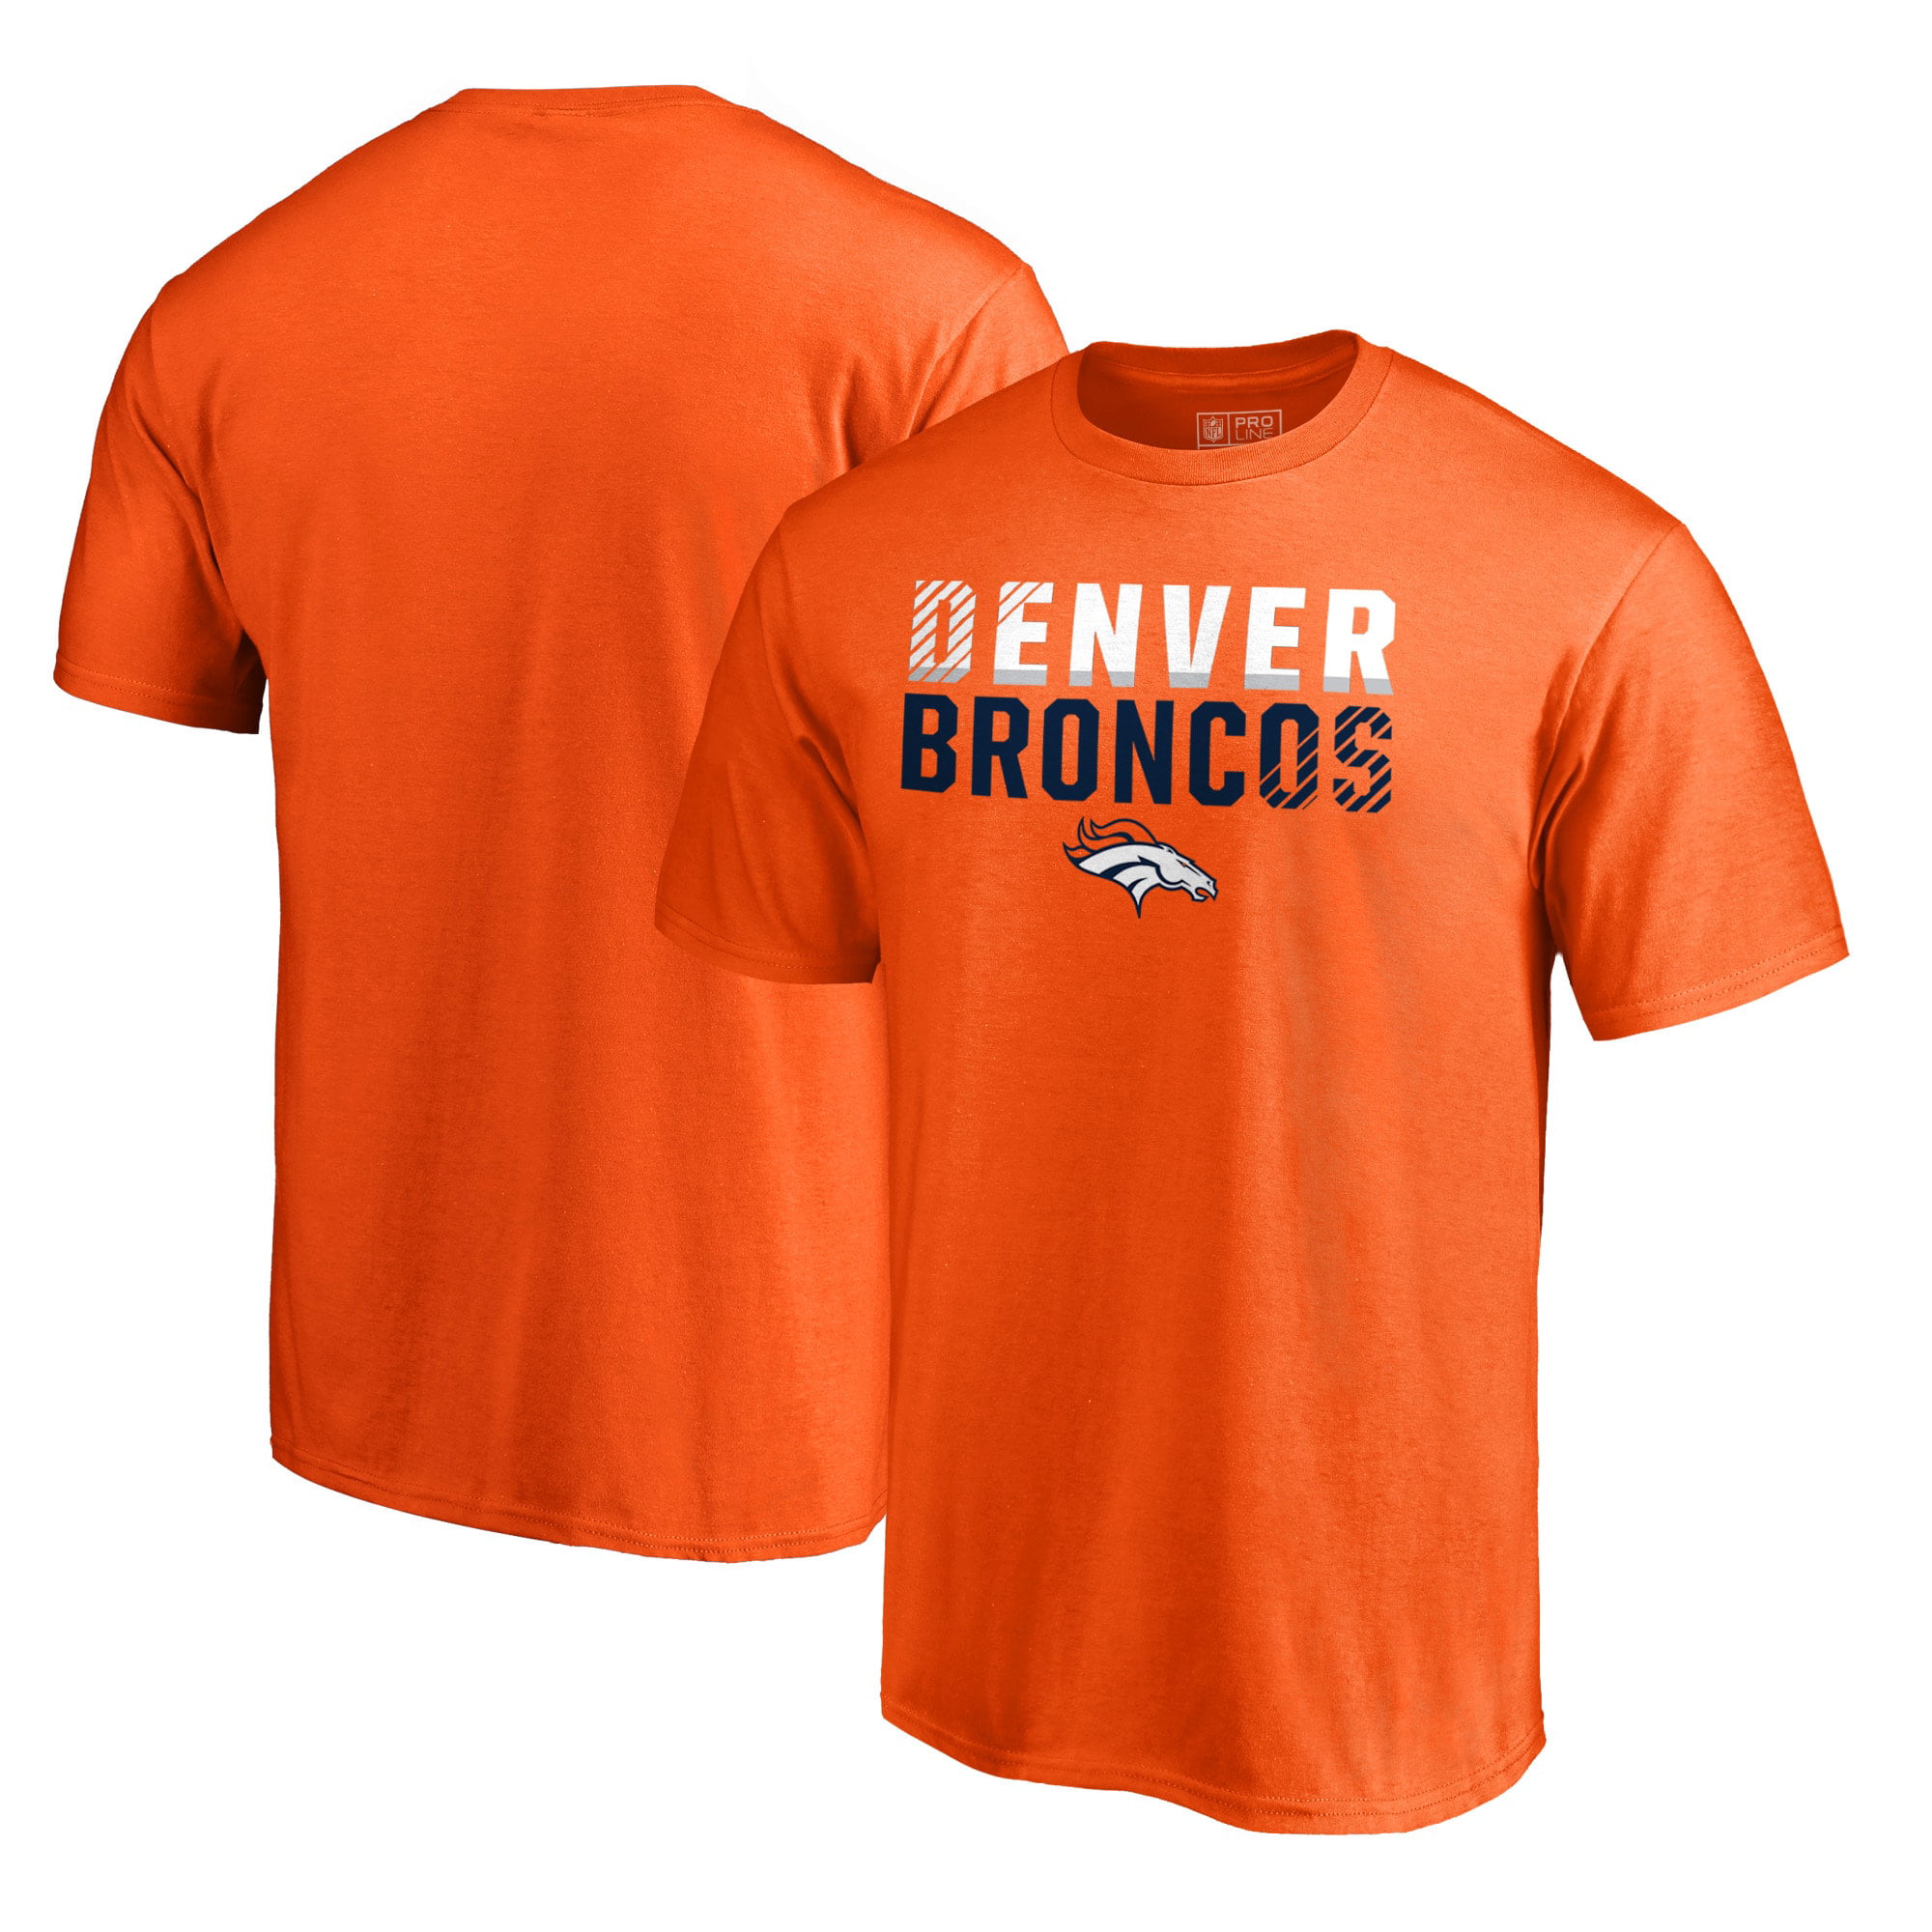 broncos shirts for sale